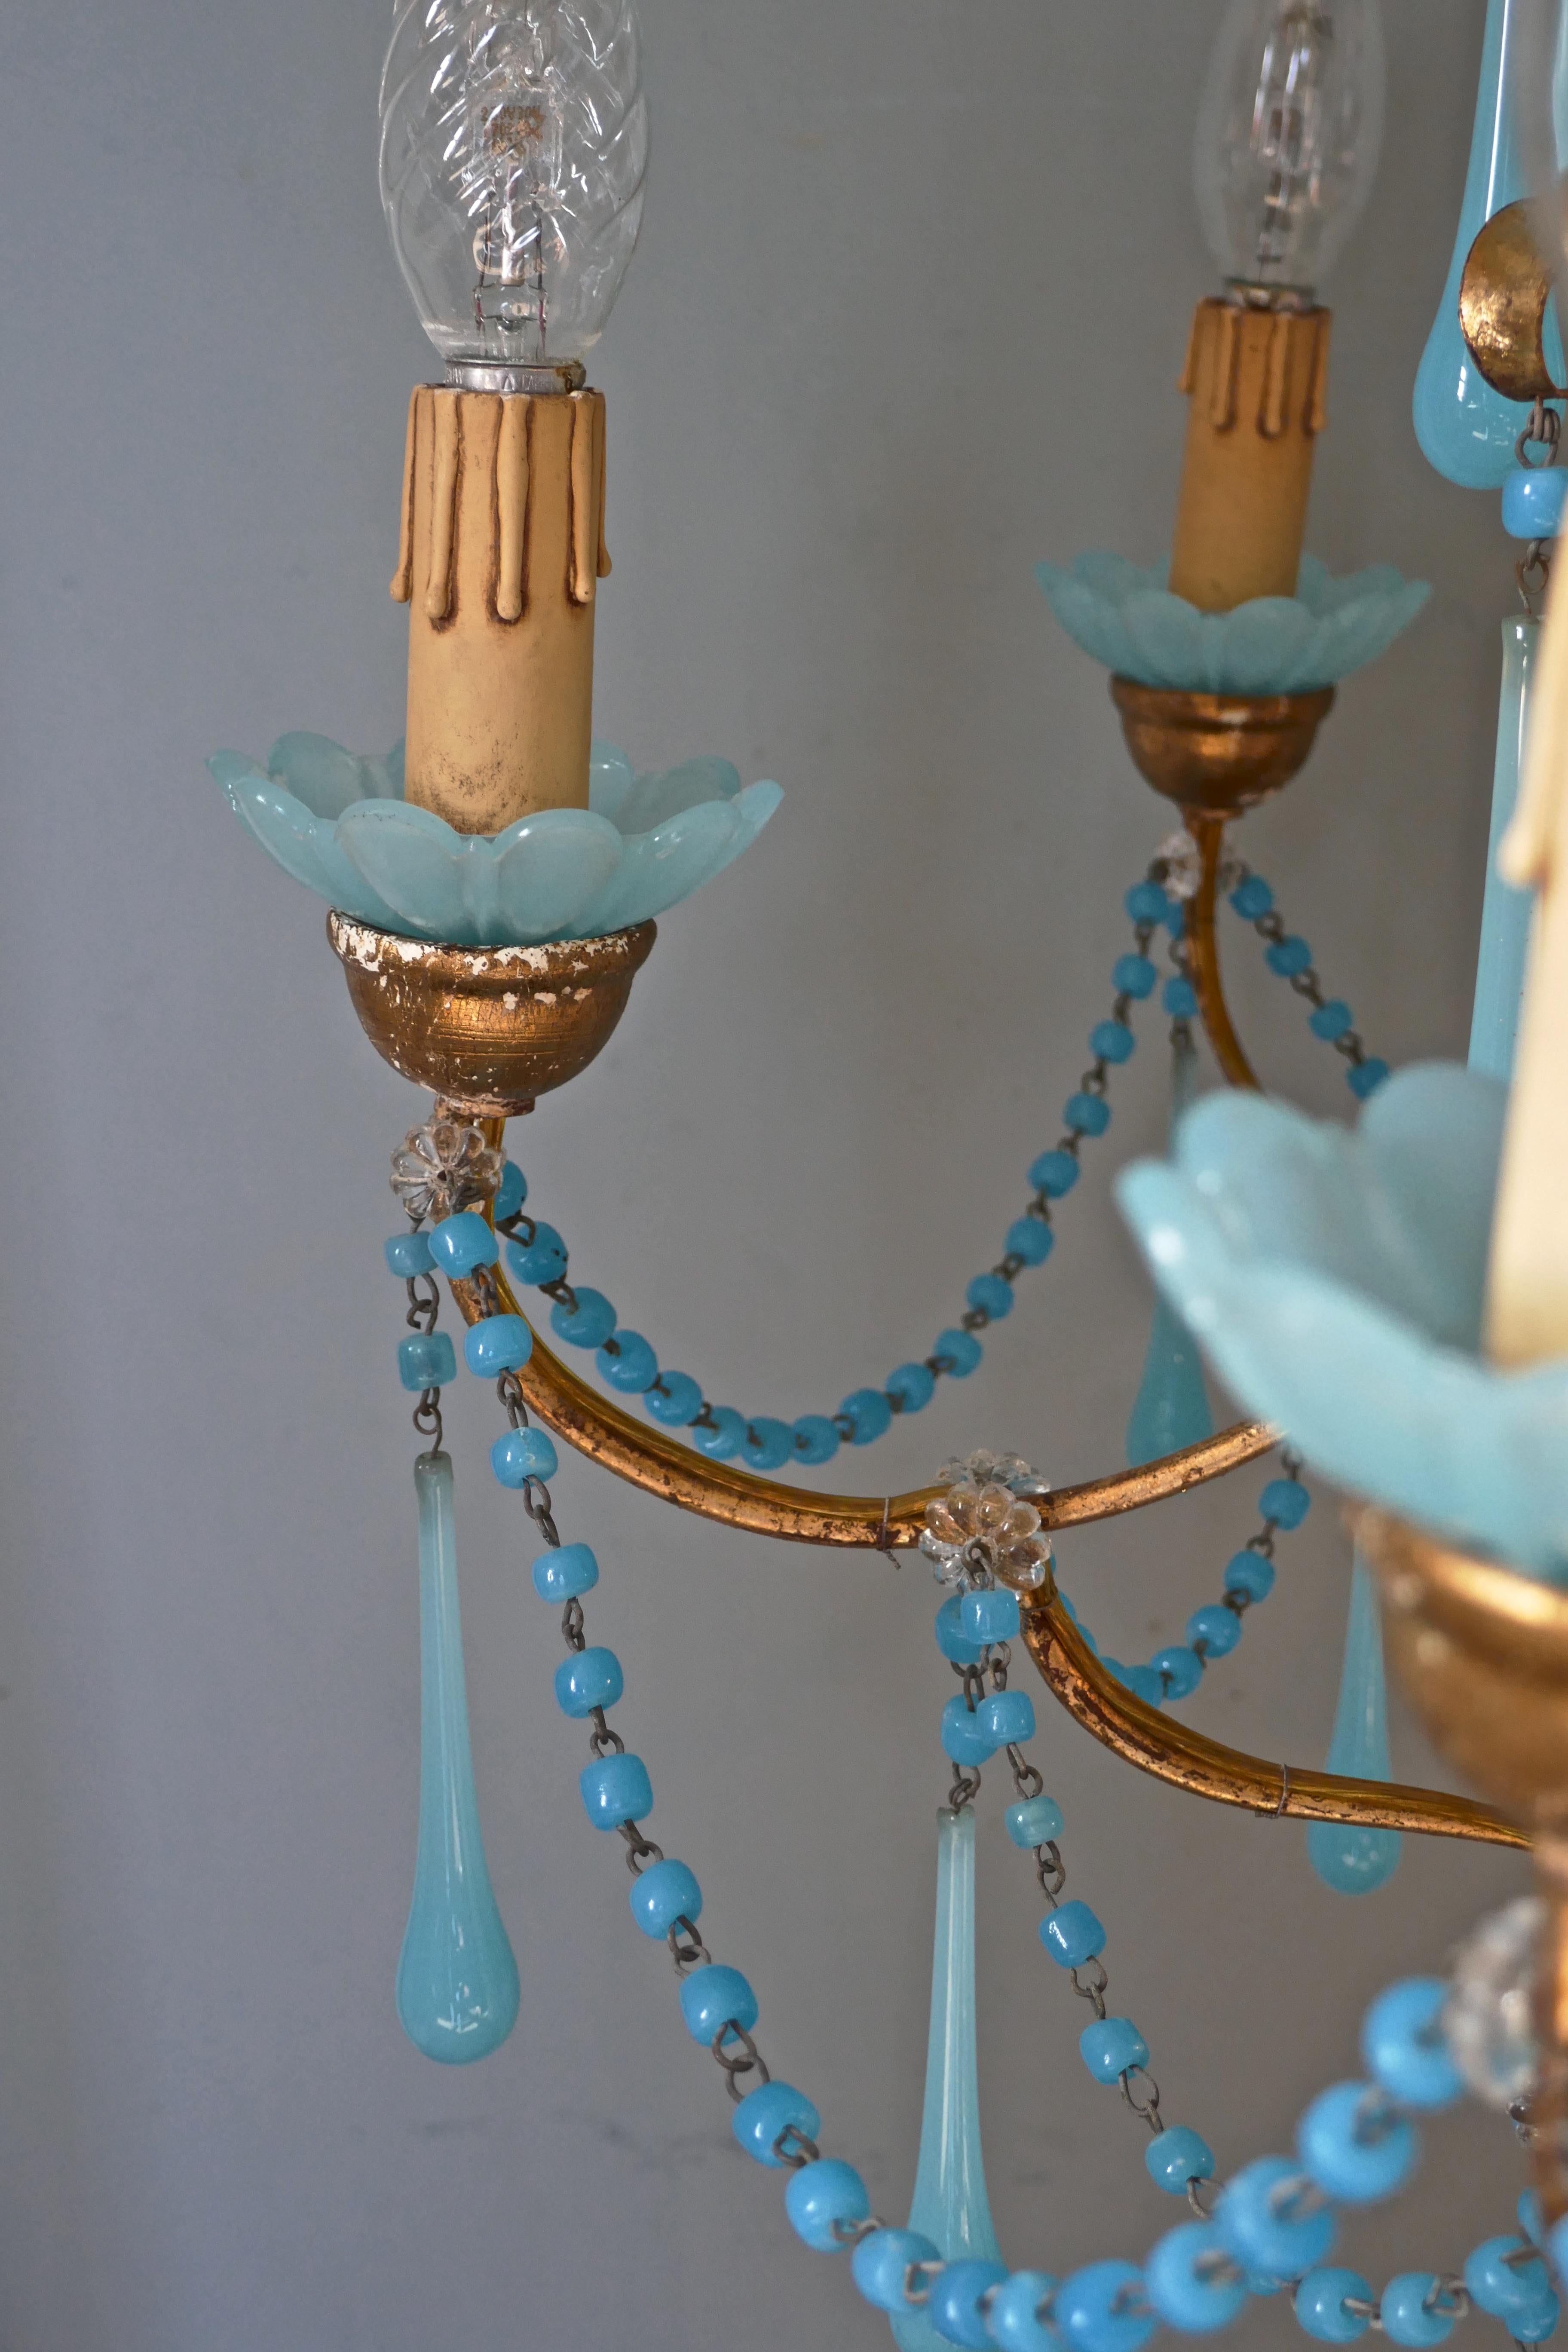 French giltwood and toleware Turquoise opaline glass 6 branch chandelier.

This is an excellent quality and very dainty piece, the wood and toleware has a gilded finish, the 6 arms have turquoise glass sconces
The light is hung with beautifully